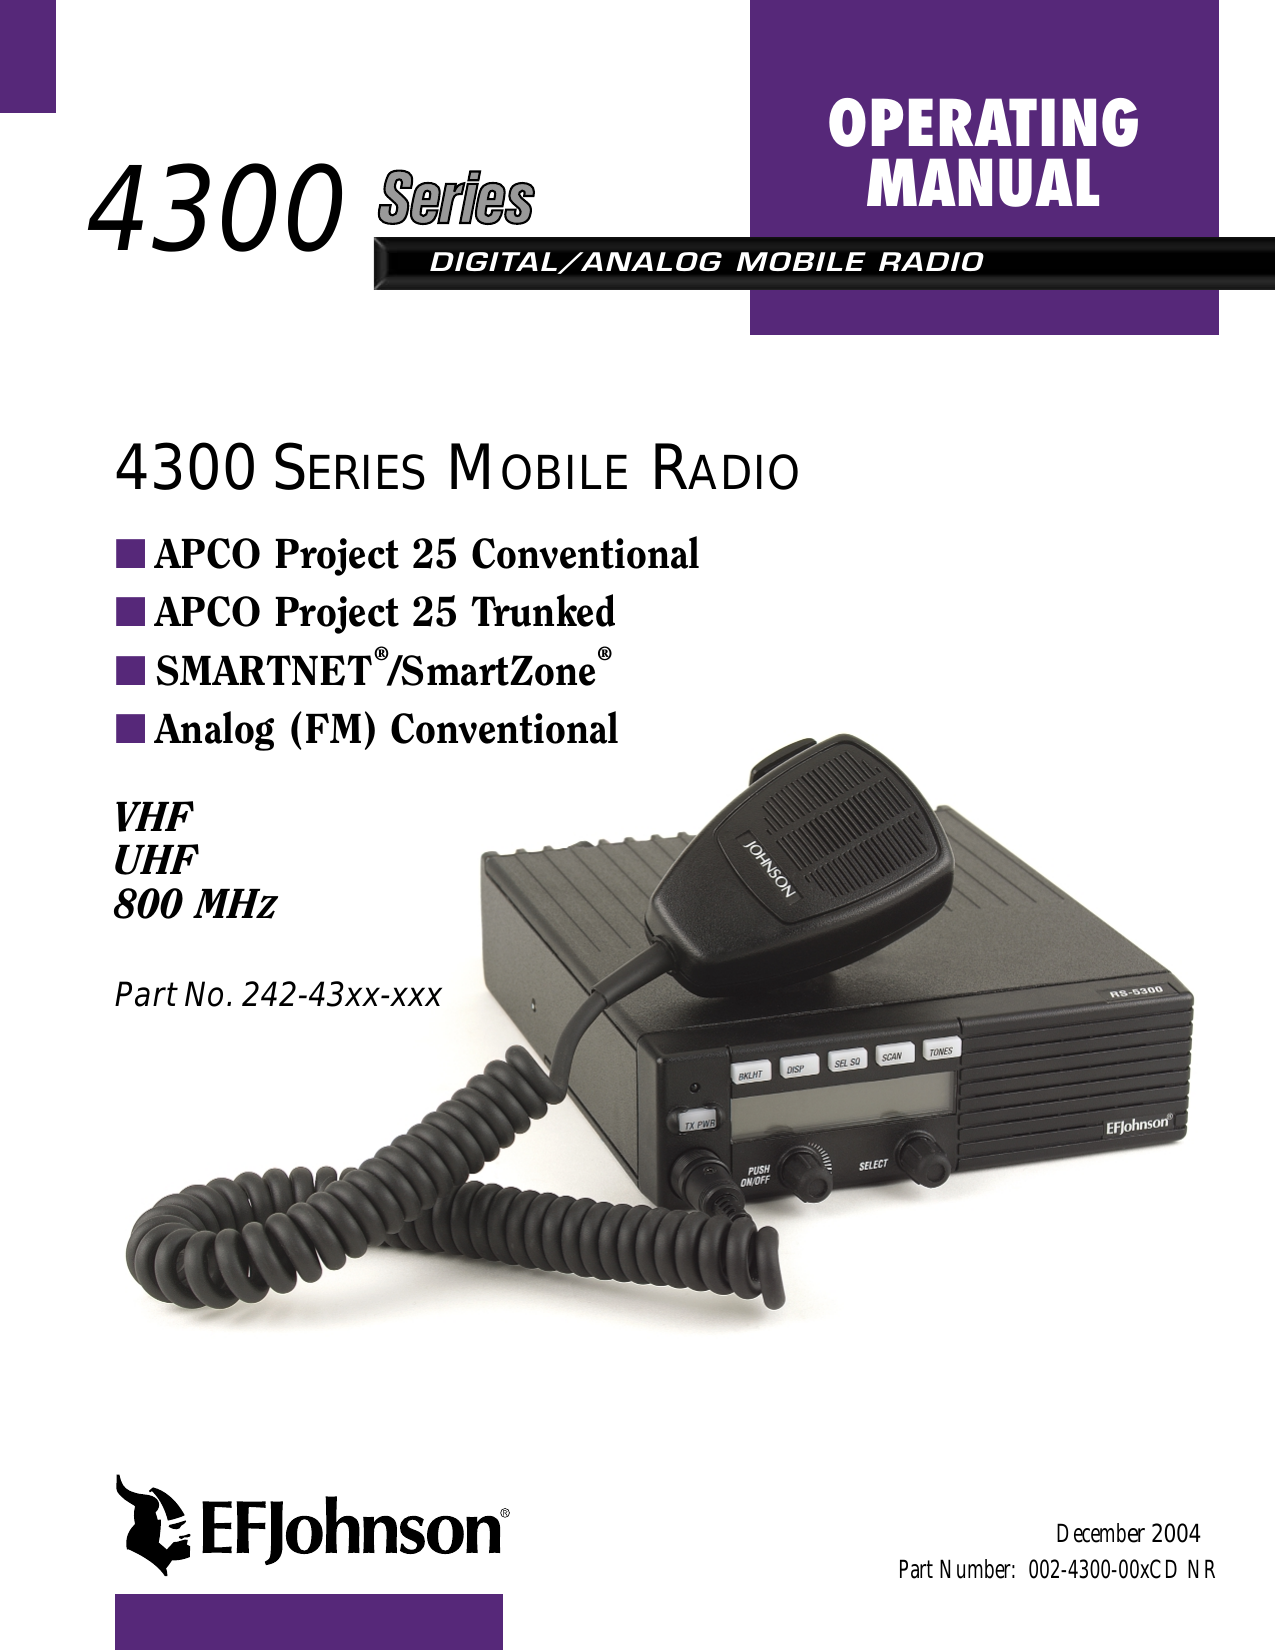 DIGITAL/ANALOG MOBILE RADIOOPERATINGMANUAL4300 SERIES MOBILE RADIO■APCO Project 25 Conventional■APCO Project 25 Trunked■SMARTNET®/SmartZone®■Analog (FM) ConventionalVHFUHF800 MHZPart No. 242-43xx-xxxPart Number:  002-4300-00xCD NRDecember 20044300